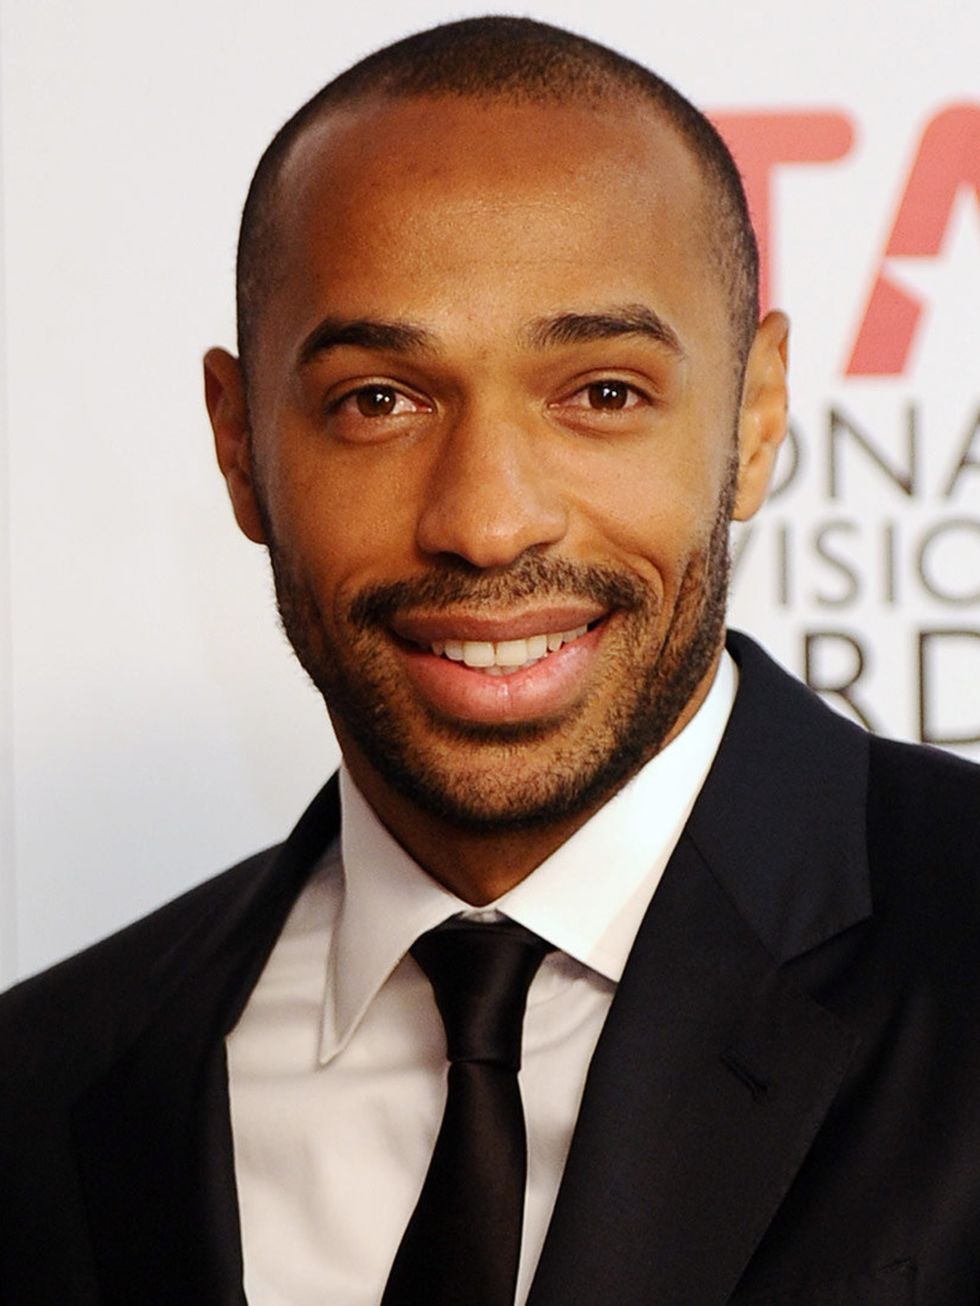 Thierry Henry: ELLE Man of the Week